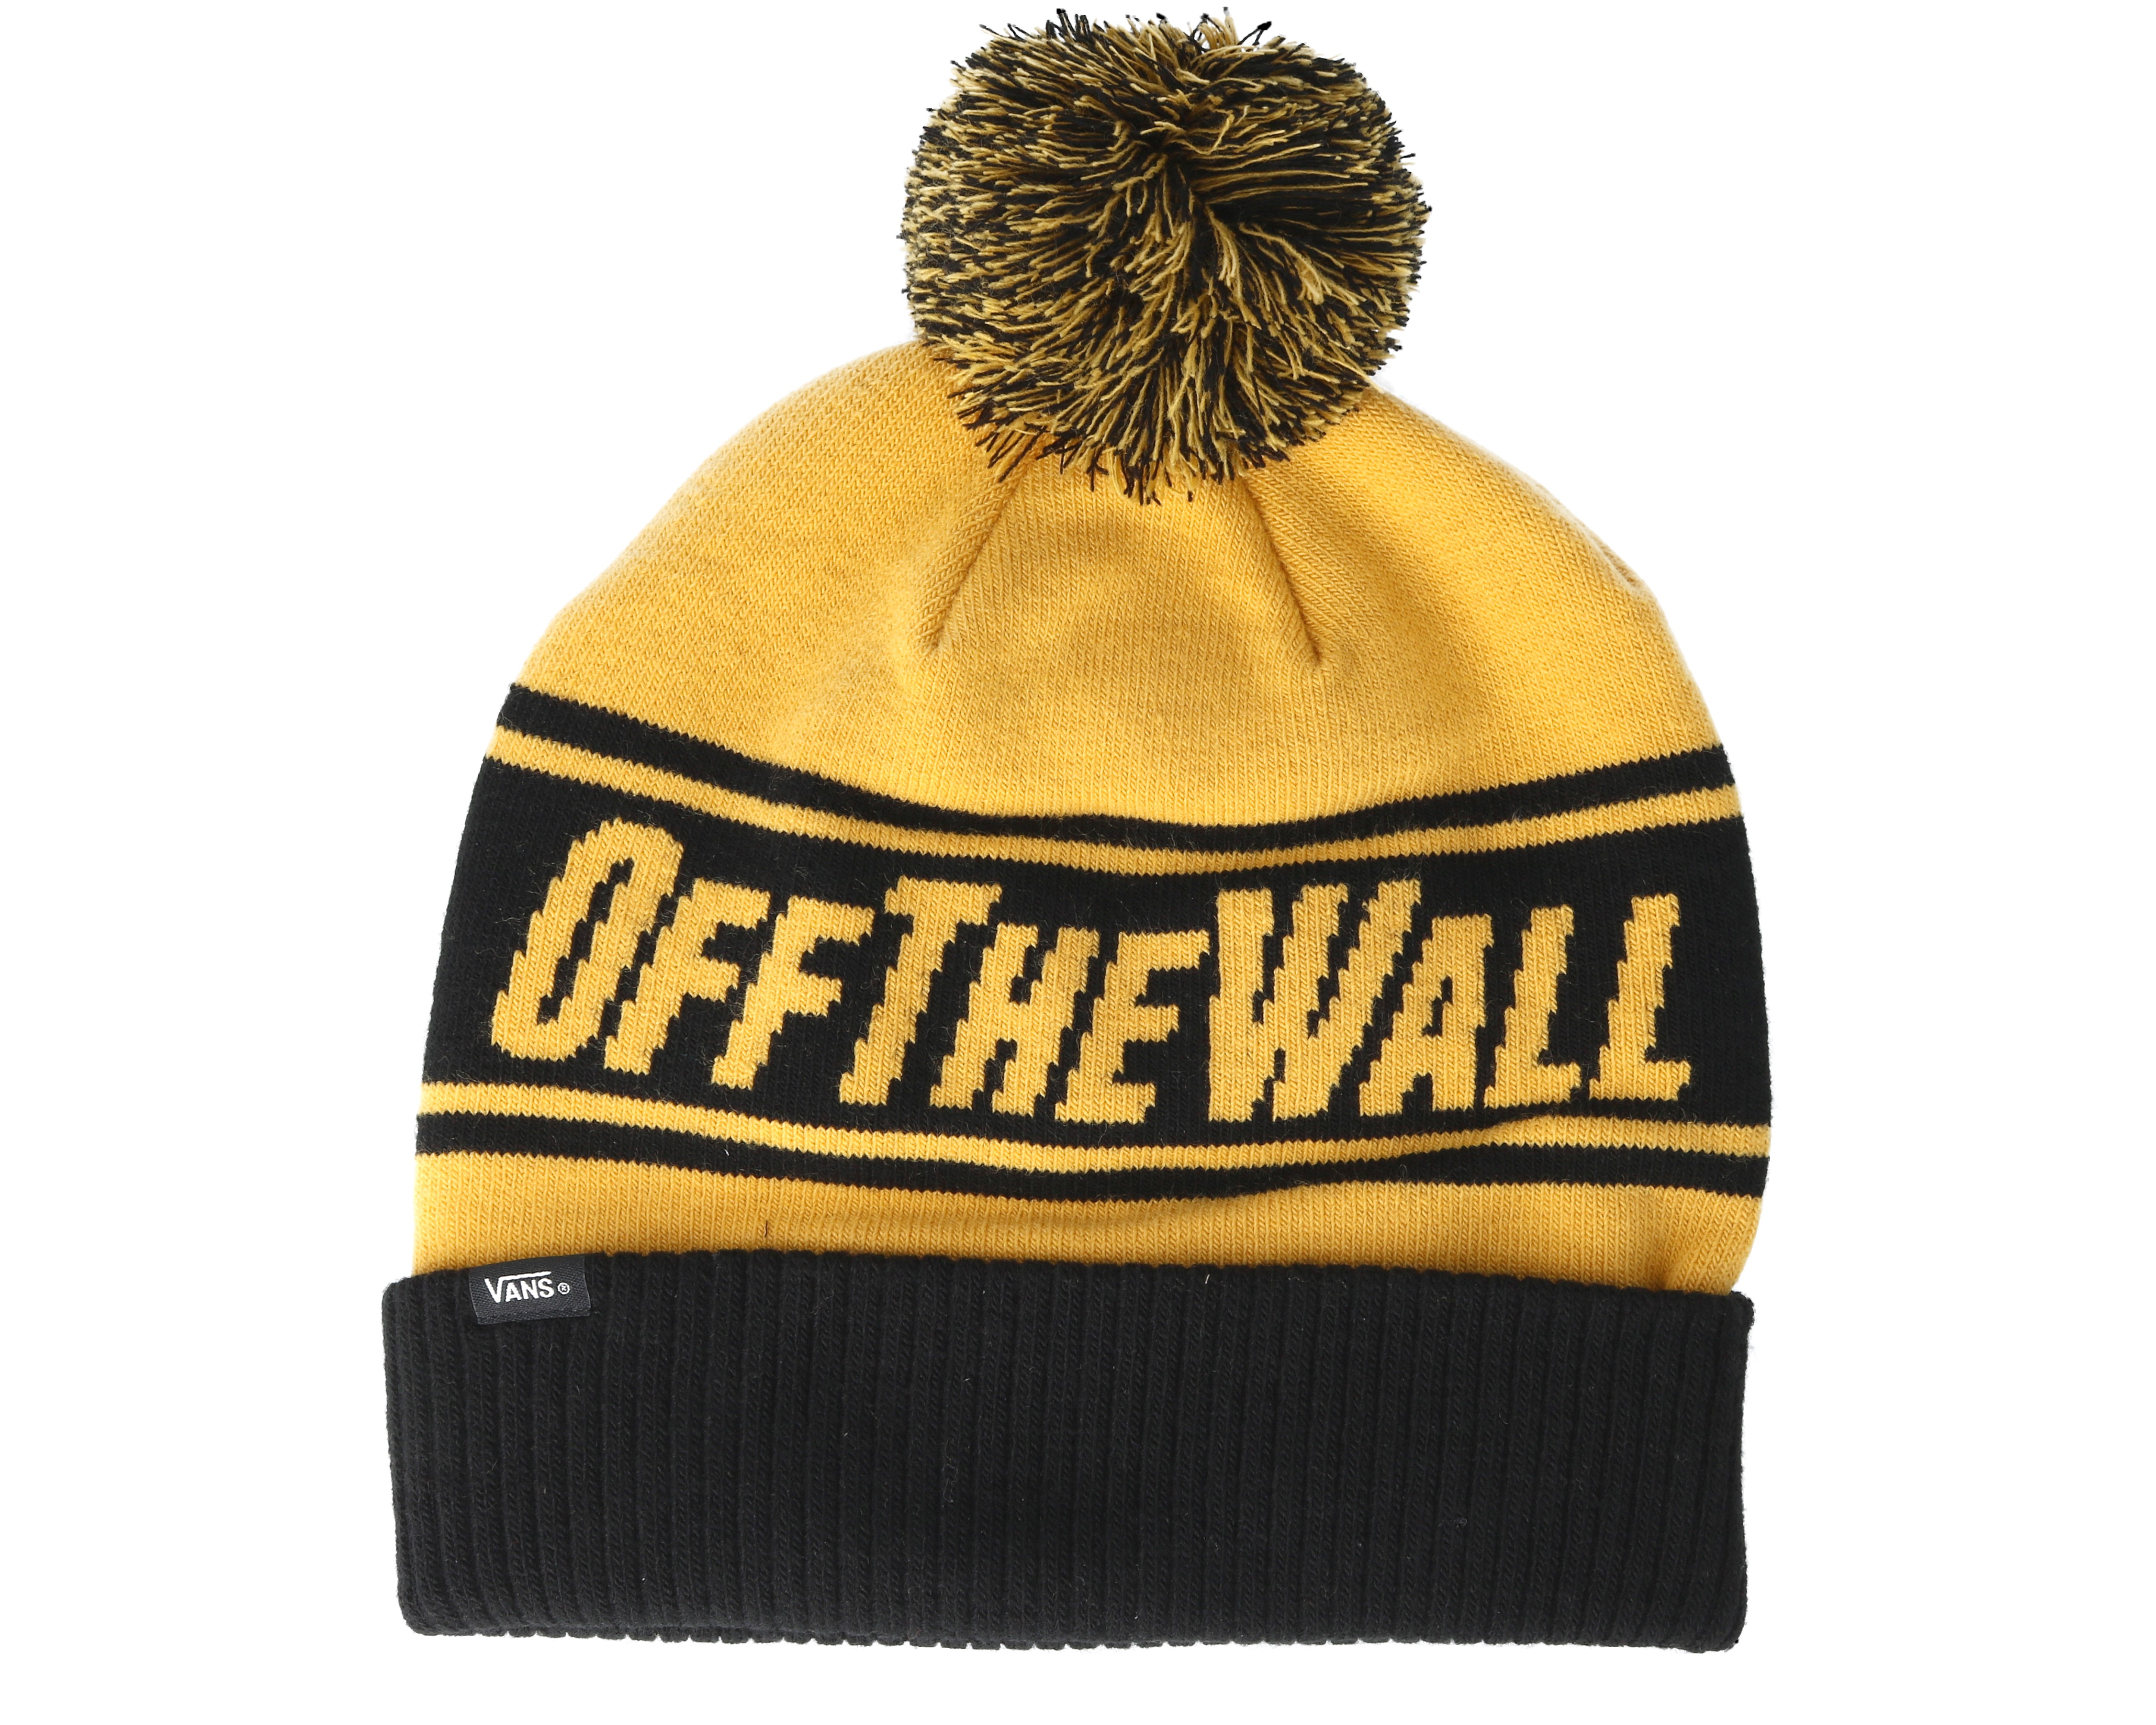 Off The Wall Mineral Yellow Pom - Vans beanies | Hatstore.co.uk